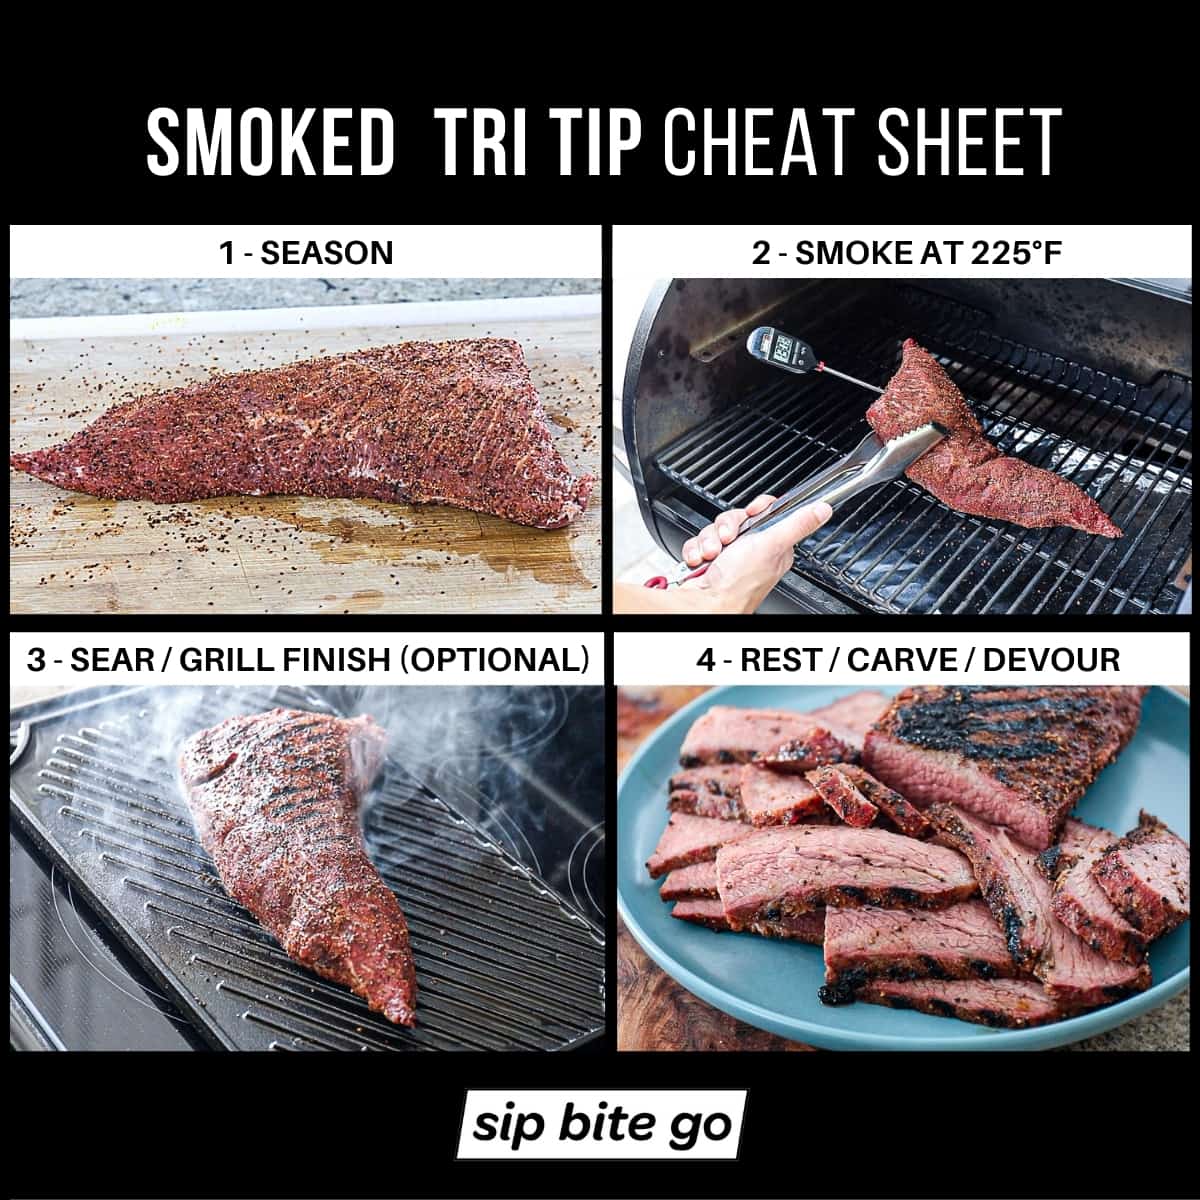 Infographic demonstrating how to smoke a tri tip steak